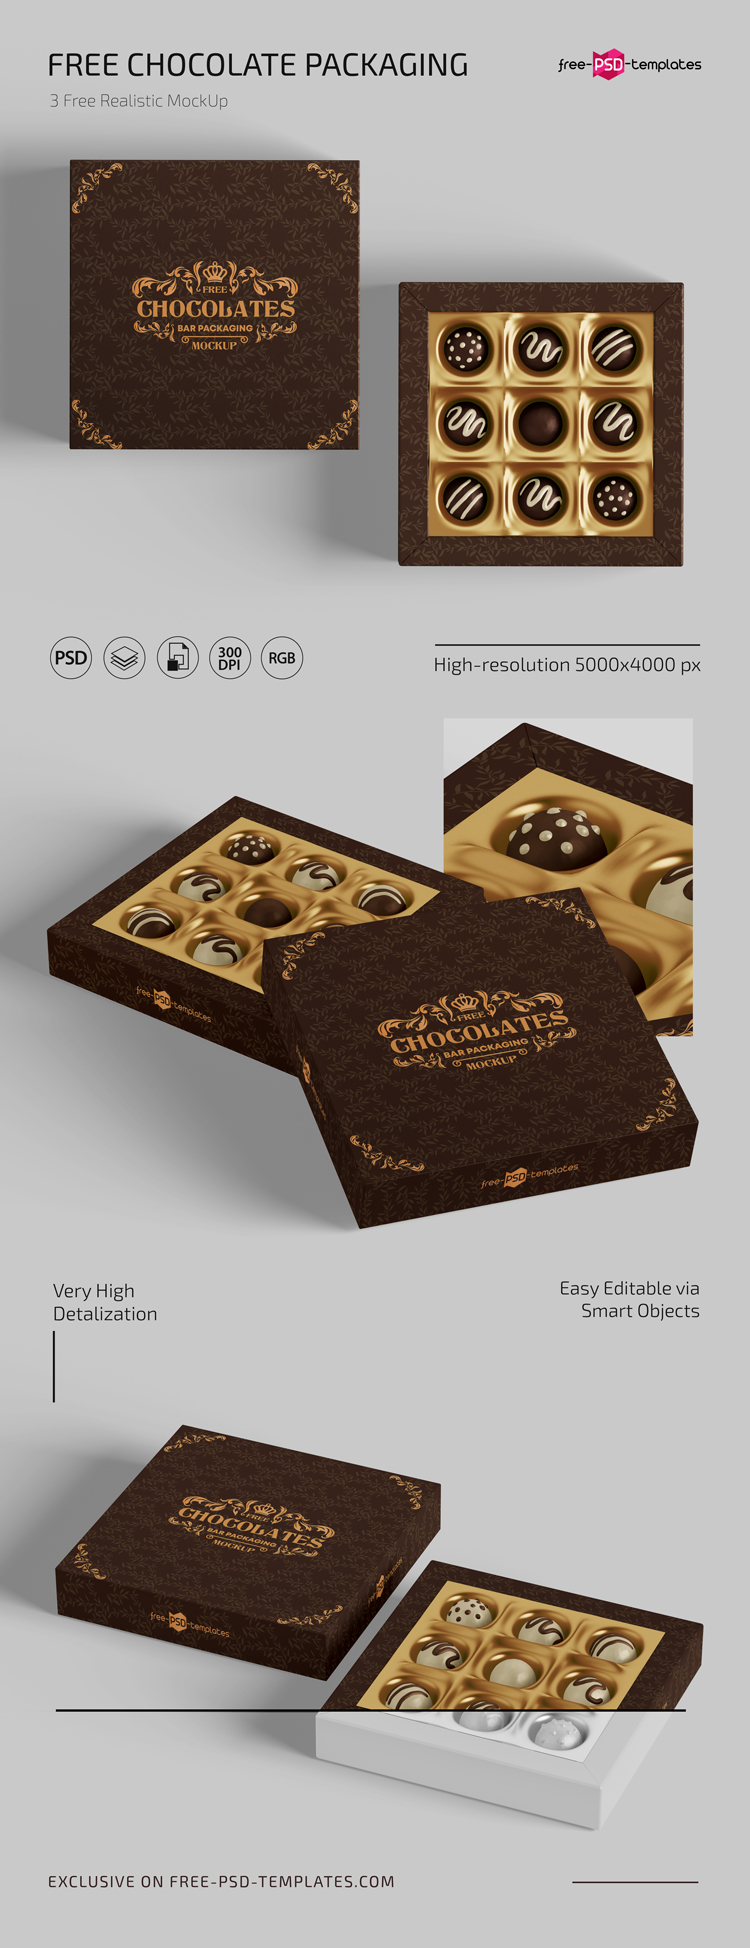 Download Free Chocolate Packaging Mockups in PSD | Free PSD Templates